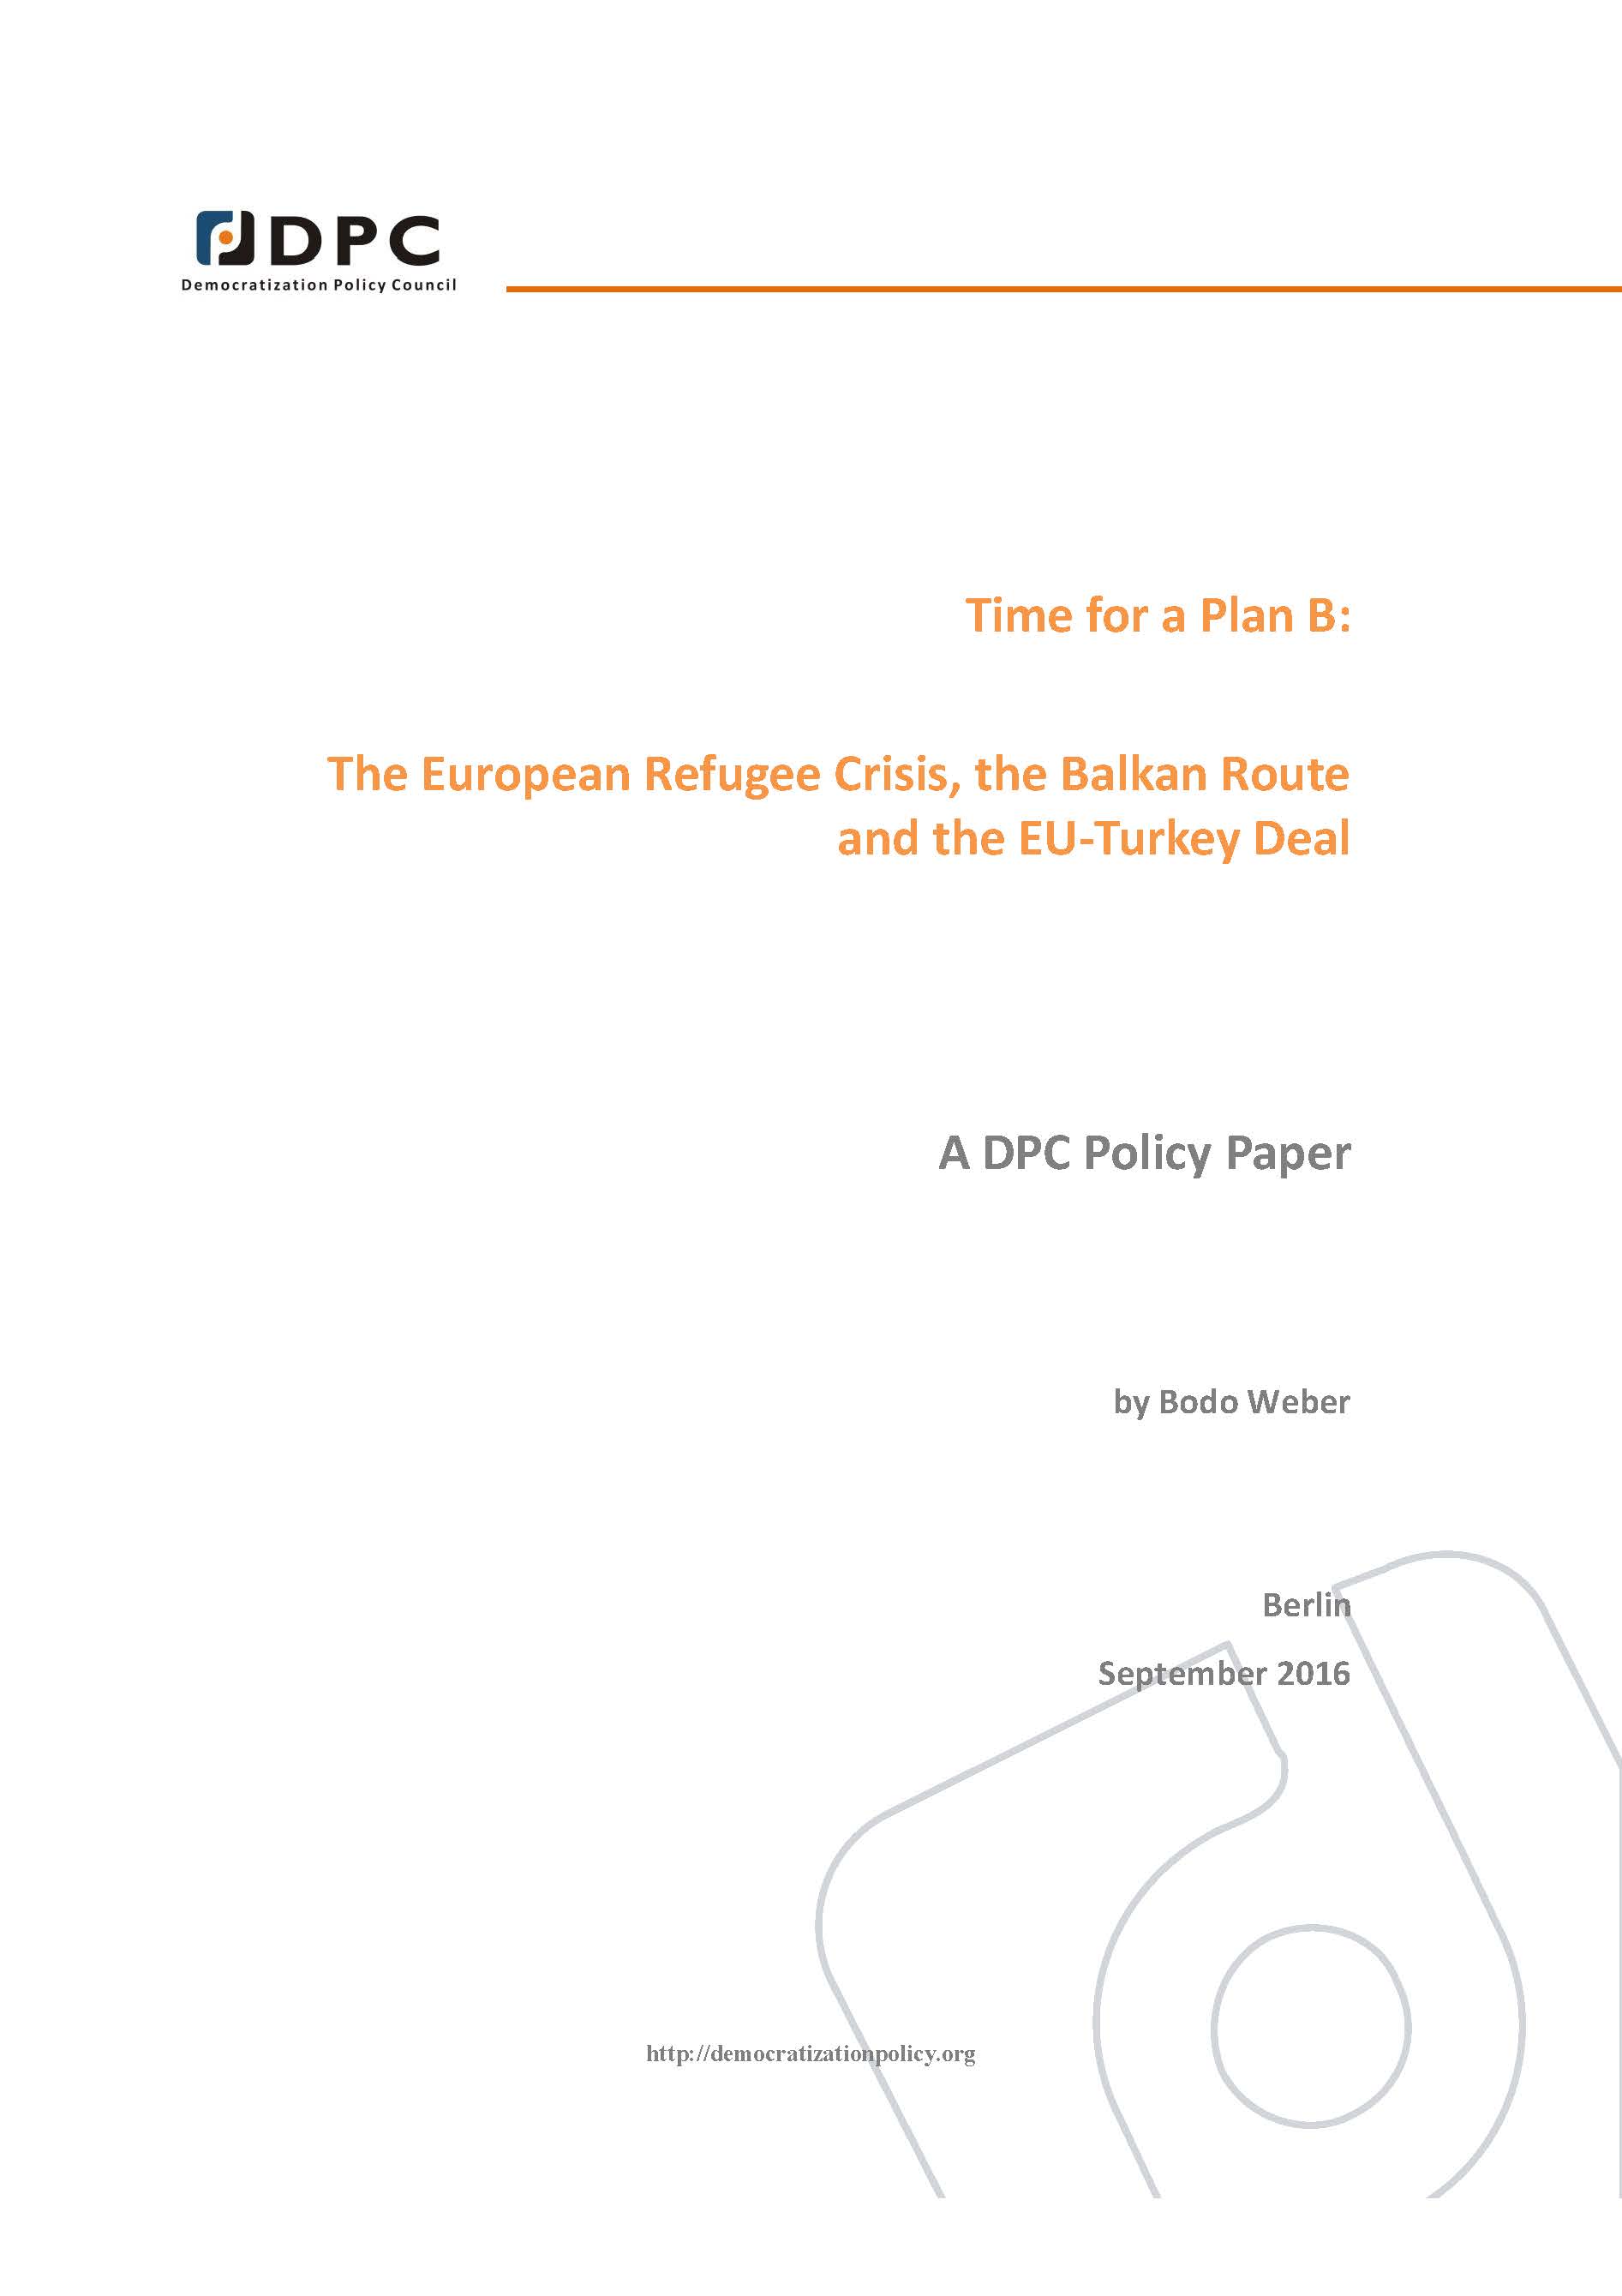 DPC POLICY PAPER: Time for a Plan B: The European Refugee Crisis, the Balkan Route and the EU-Turkey Deal